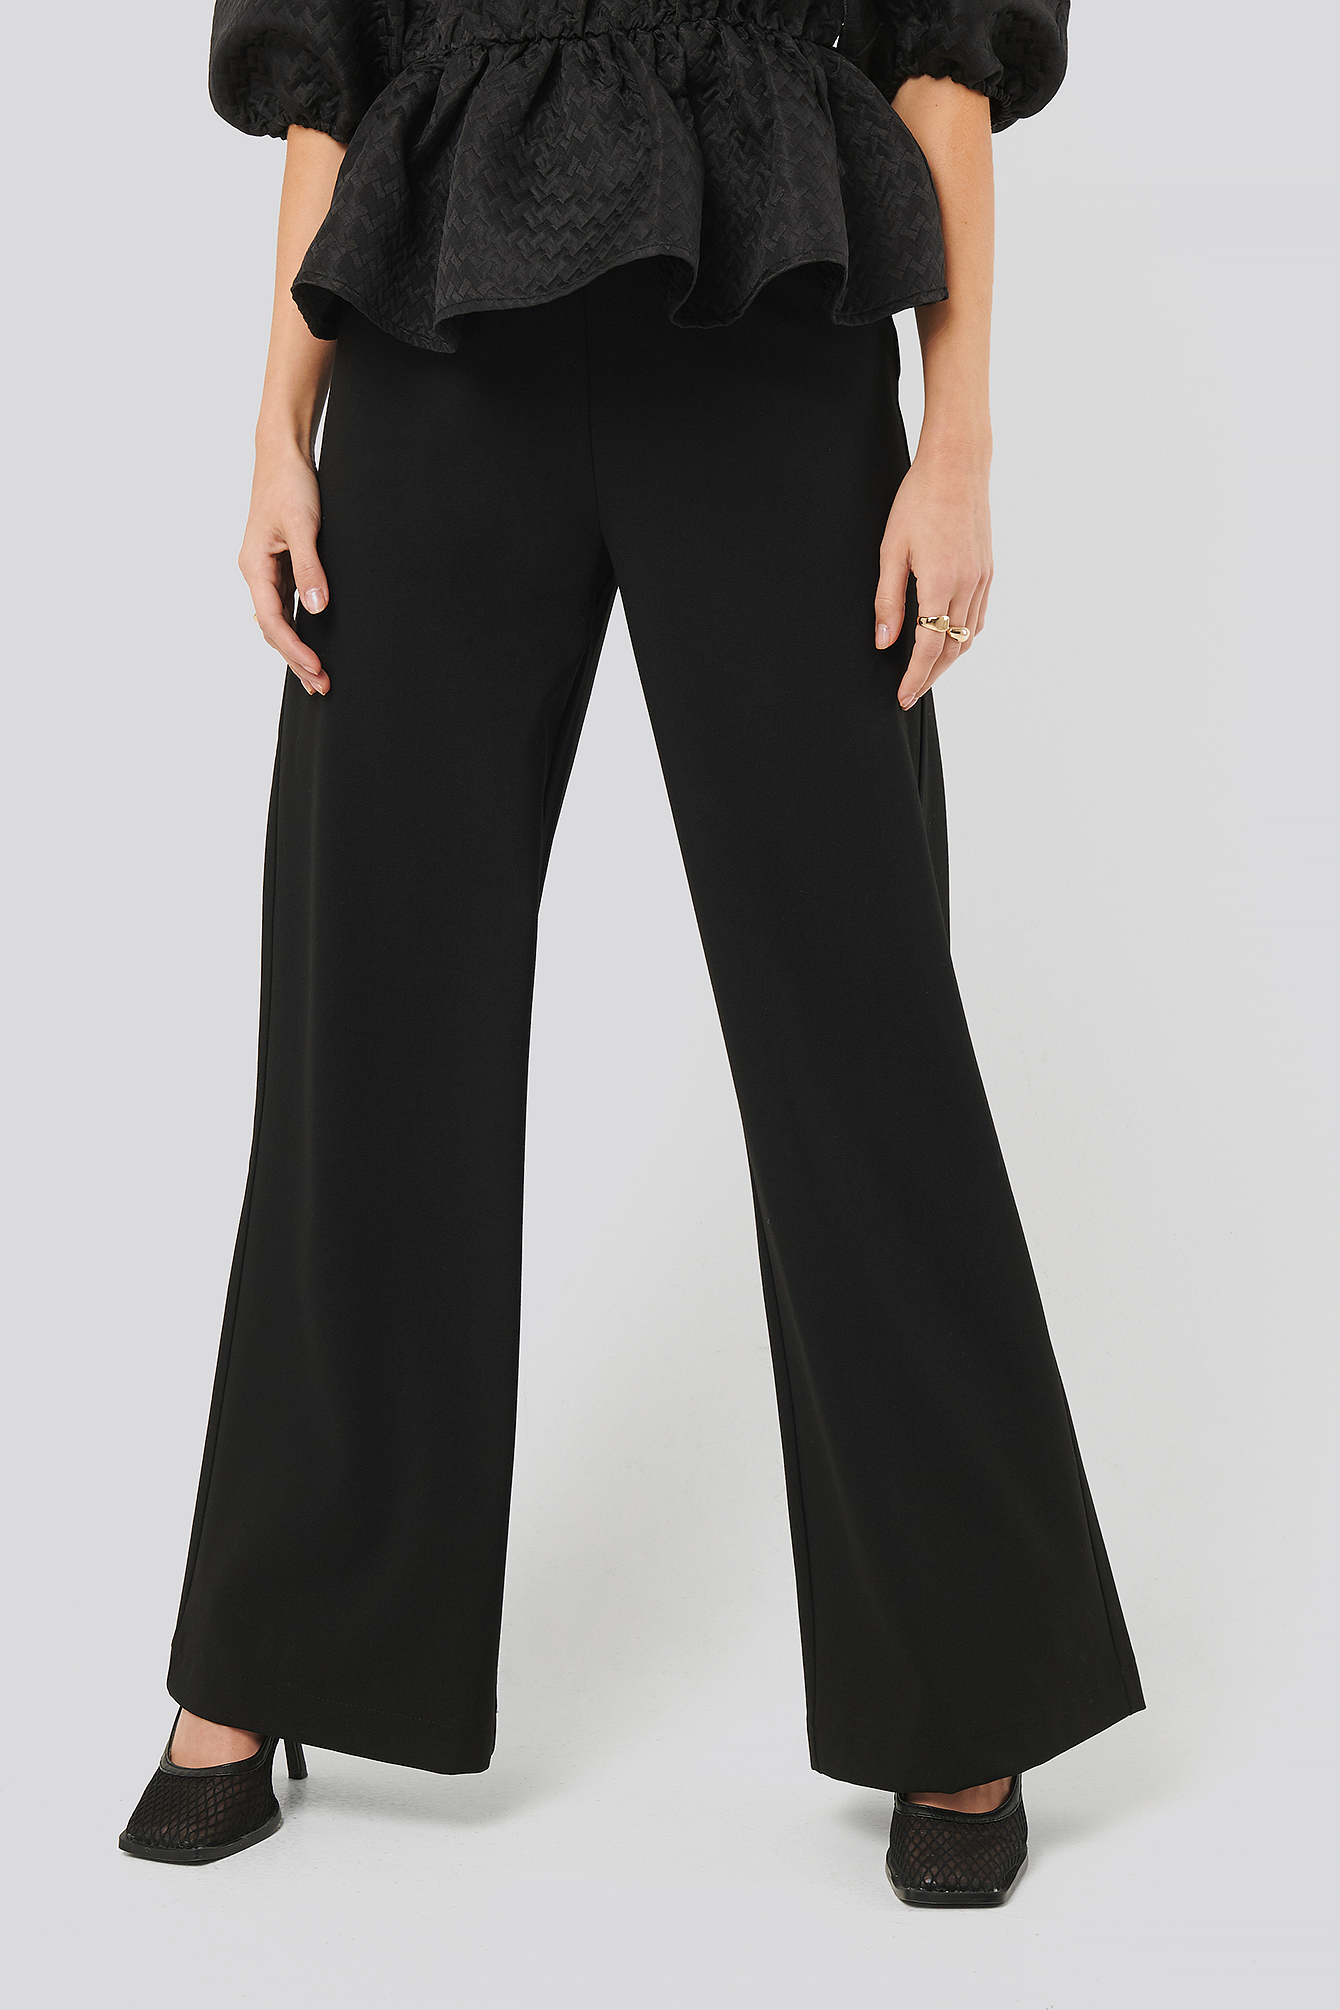 Black Straight Fit Trousers